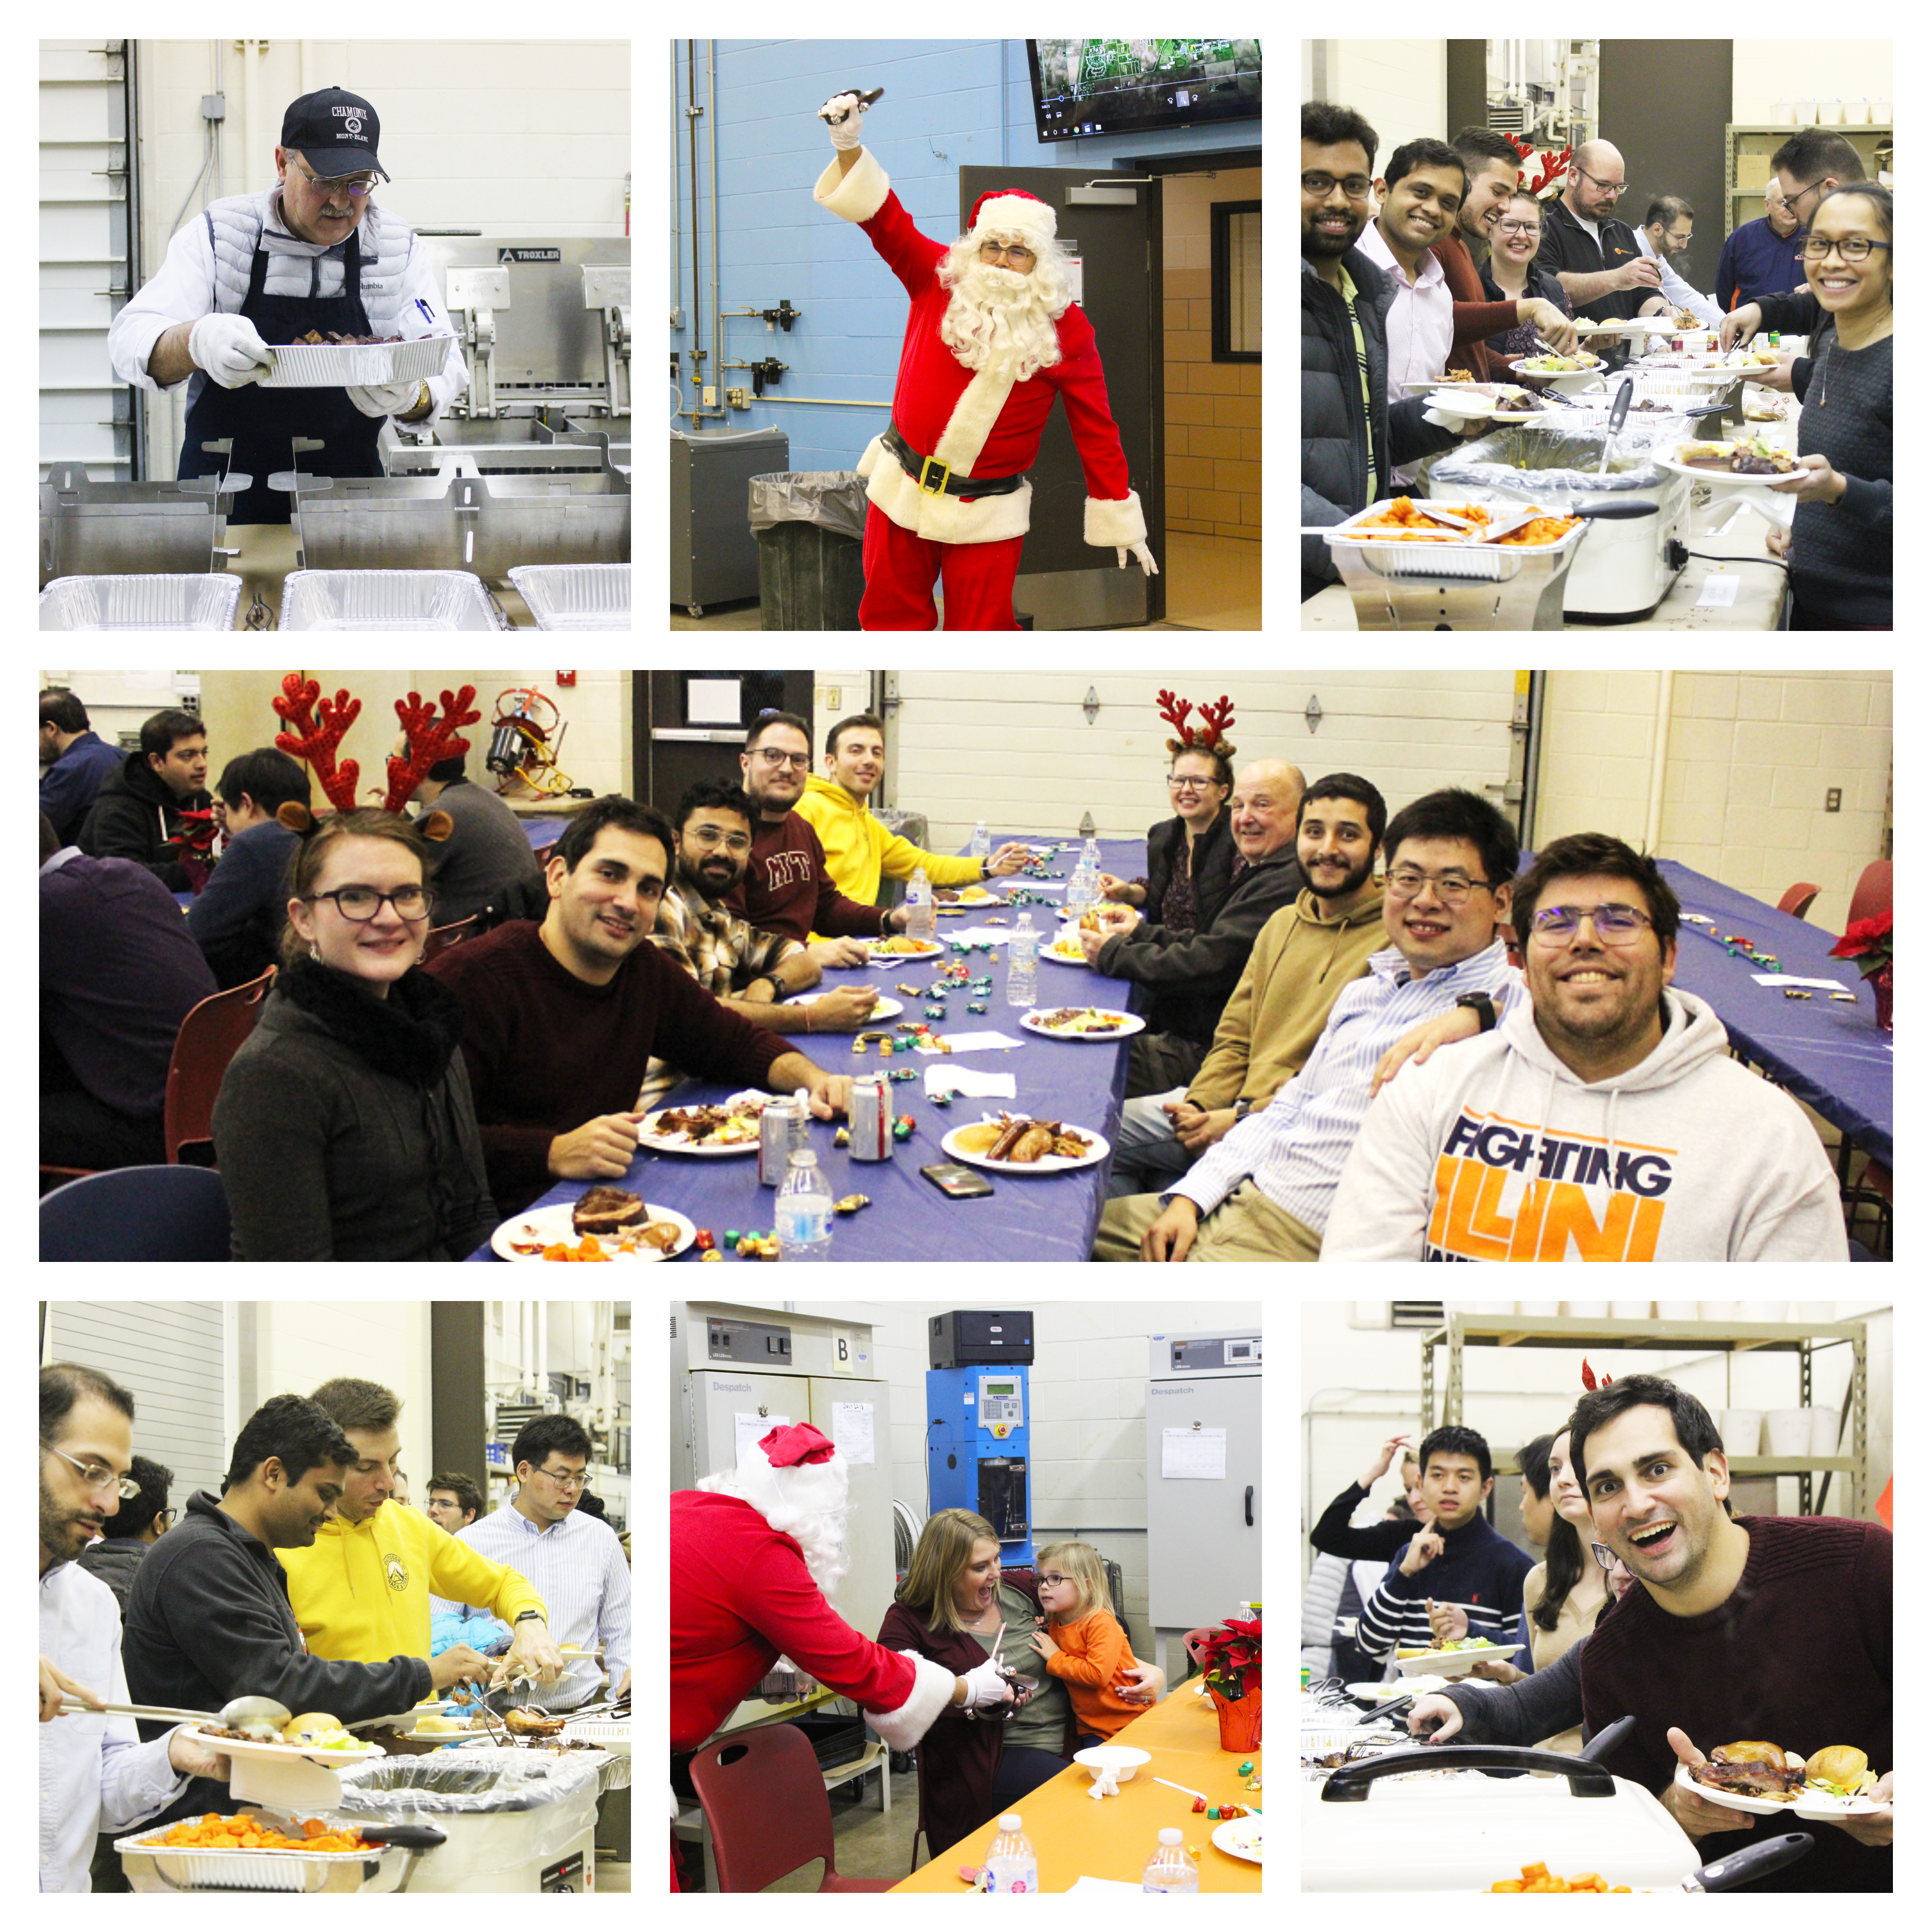 Students and staffers filled the Winter Open House with delectable goodies and loads of laughter to brighten their holiday season.